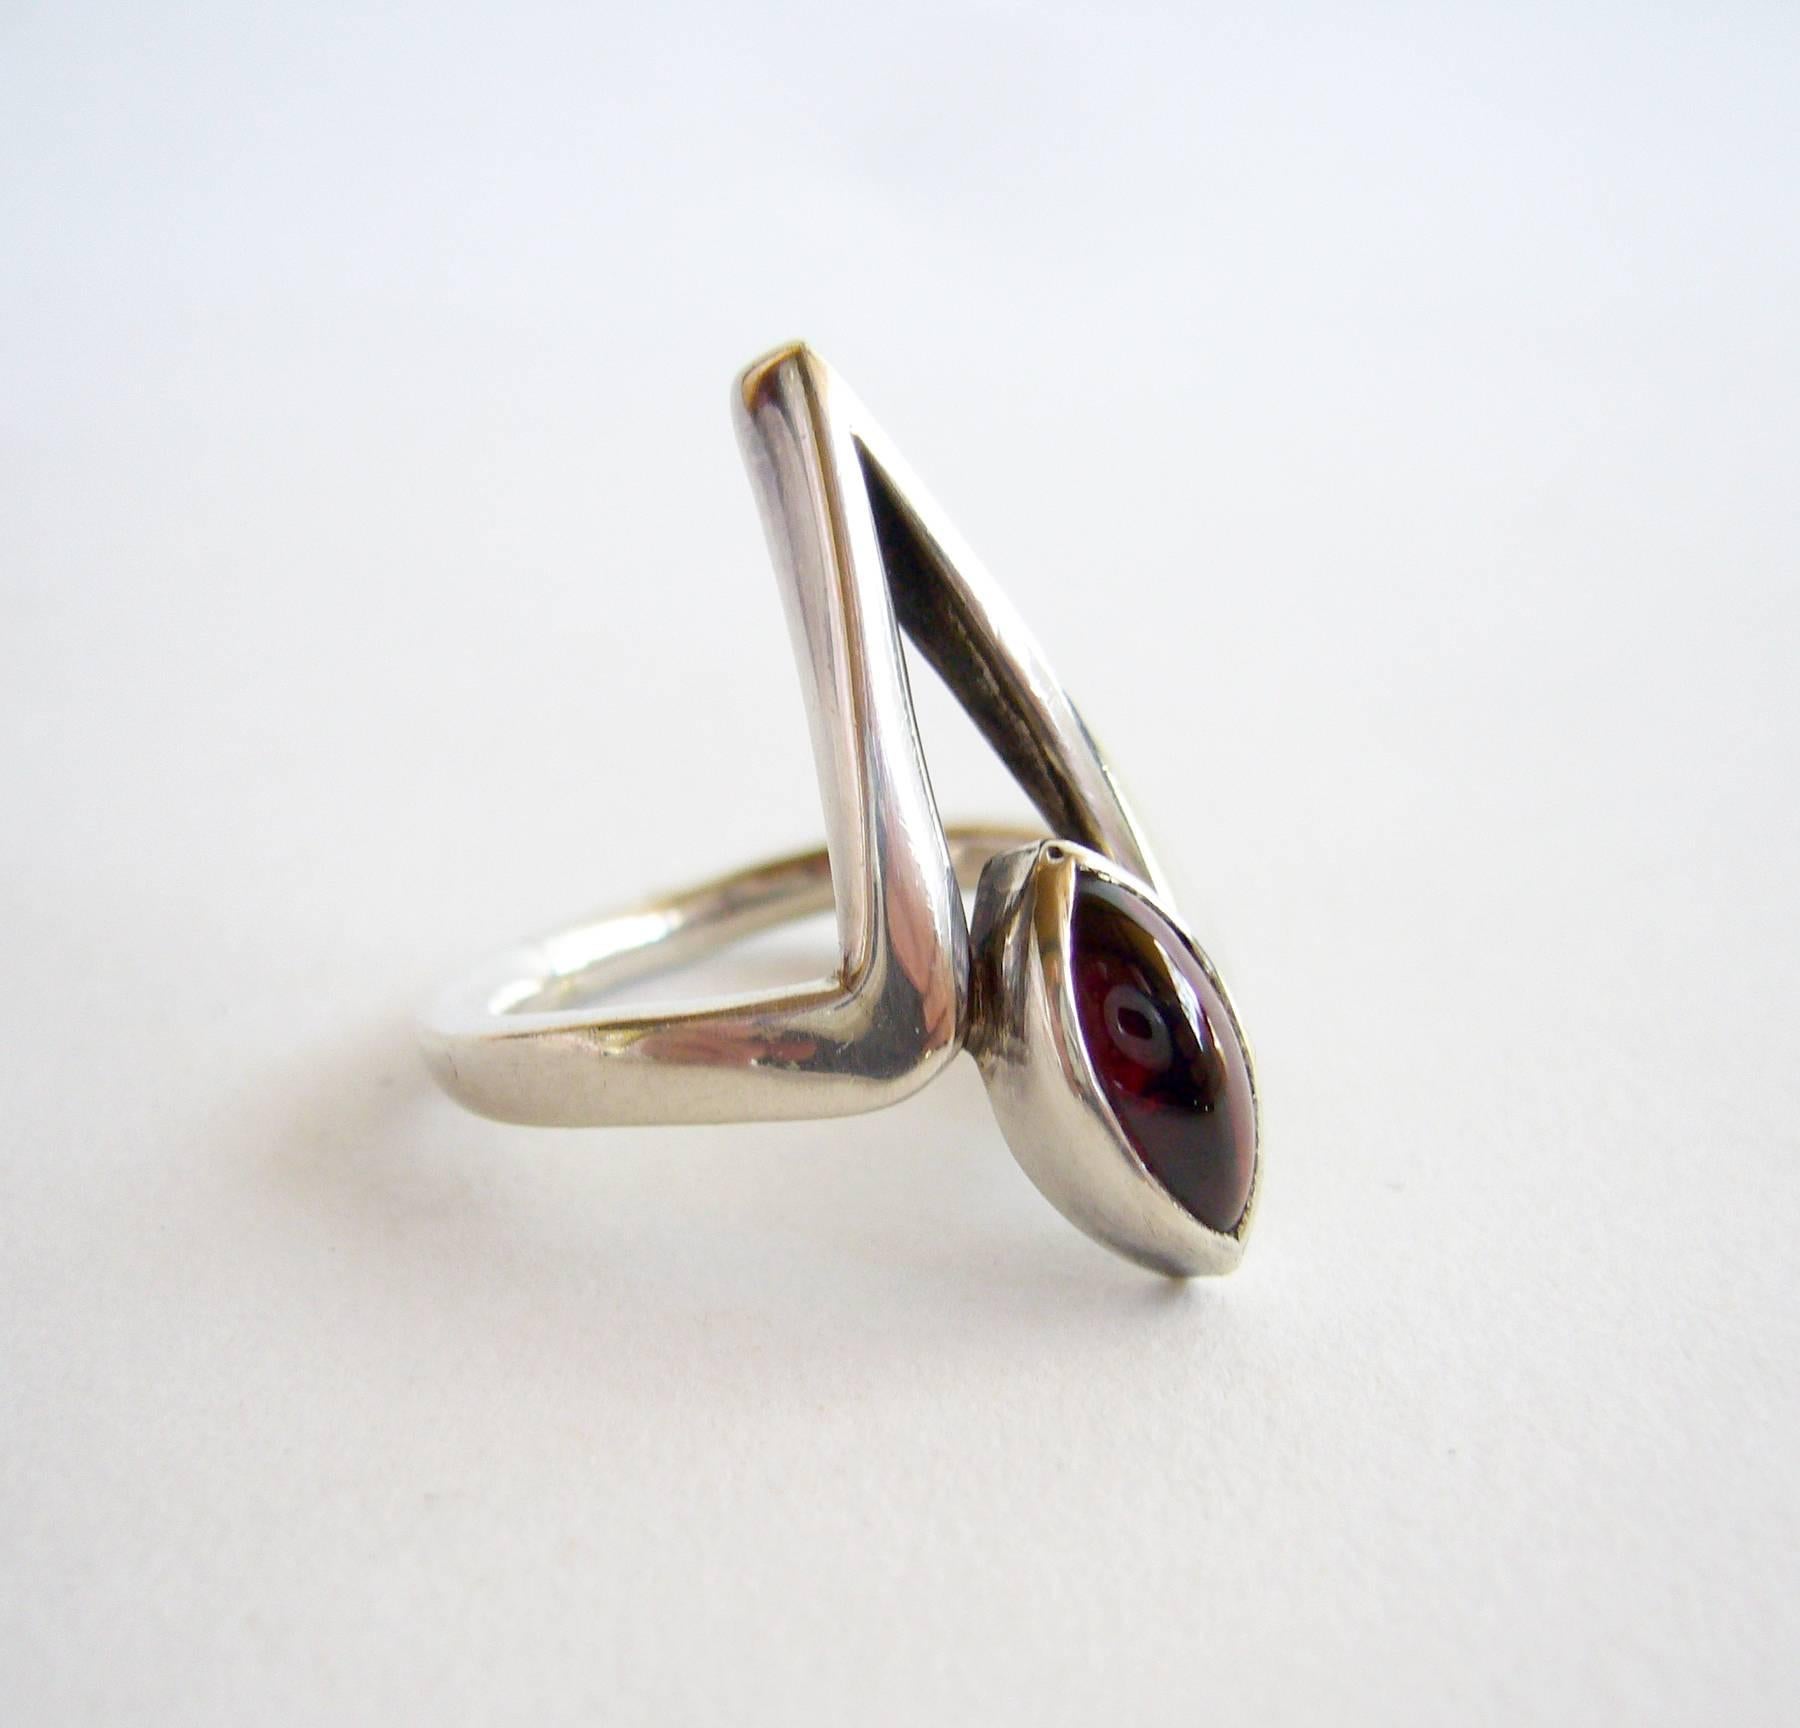 Sterling silver and garnet ring created by American modernist jeweler, Jack Nutting of San Francisco.  Ring is a finger size 6.5, length of the face measures 3/4